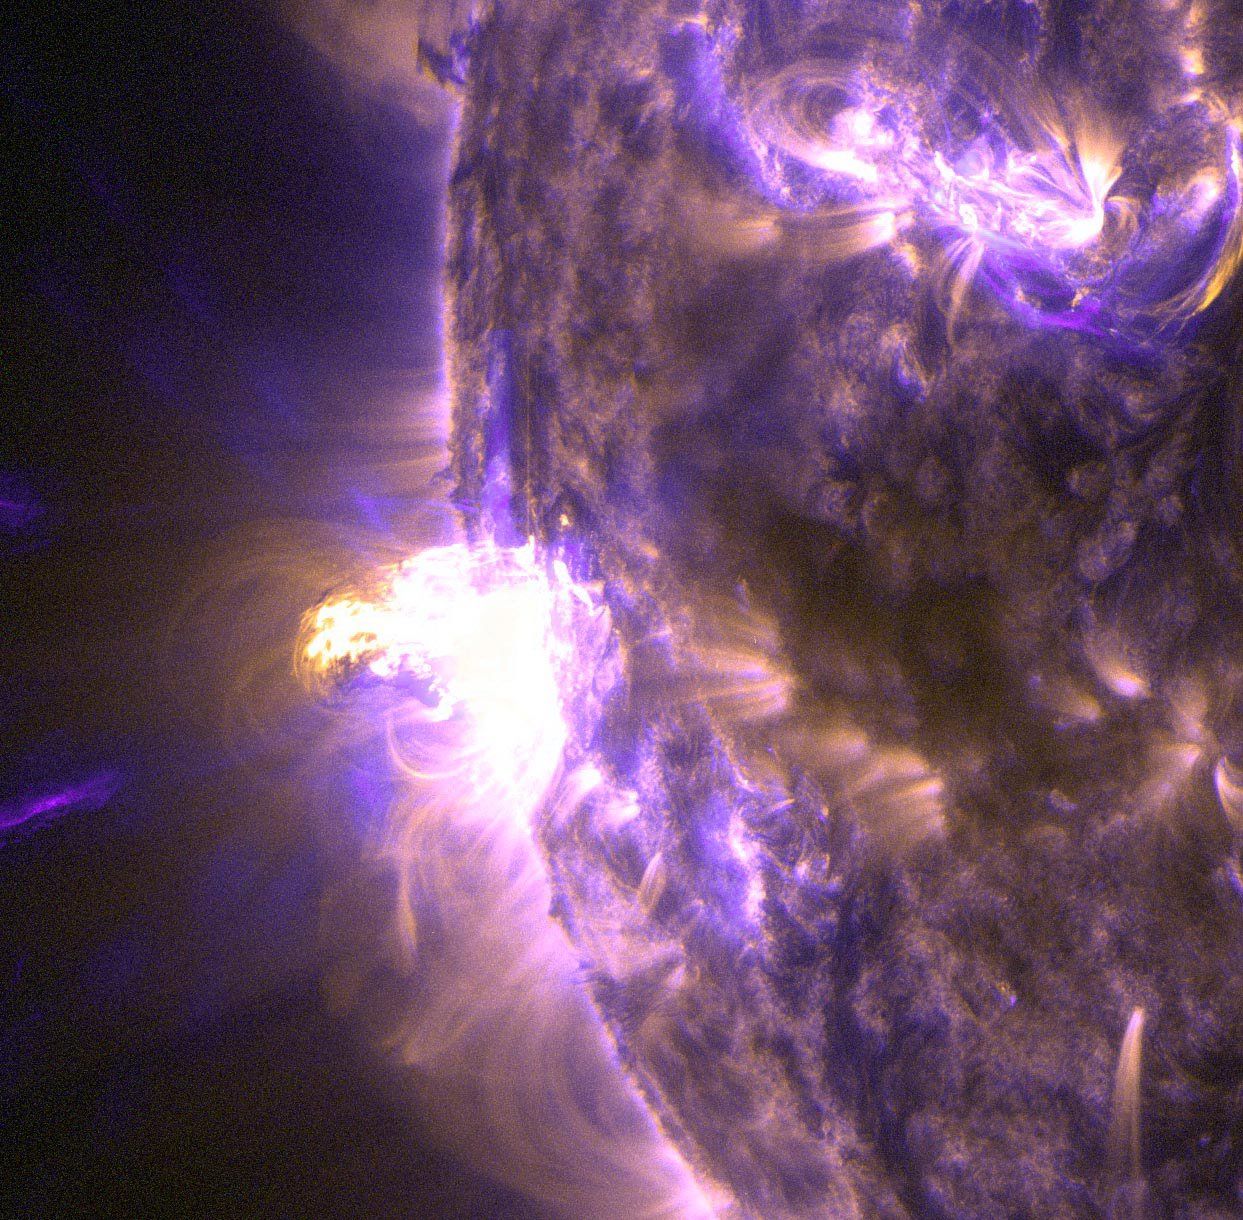 Solar flare captured by NASA's Solar Dynamics Observatory in August